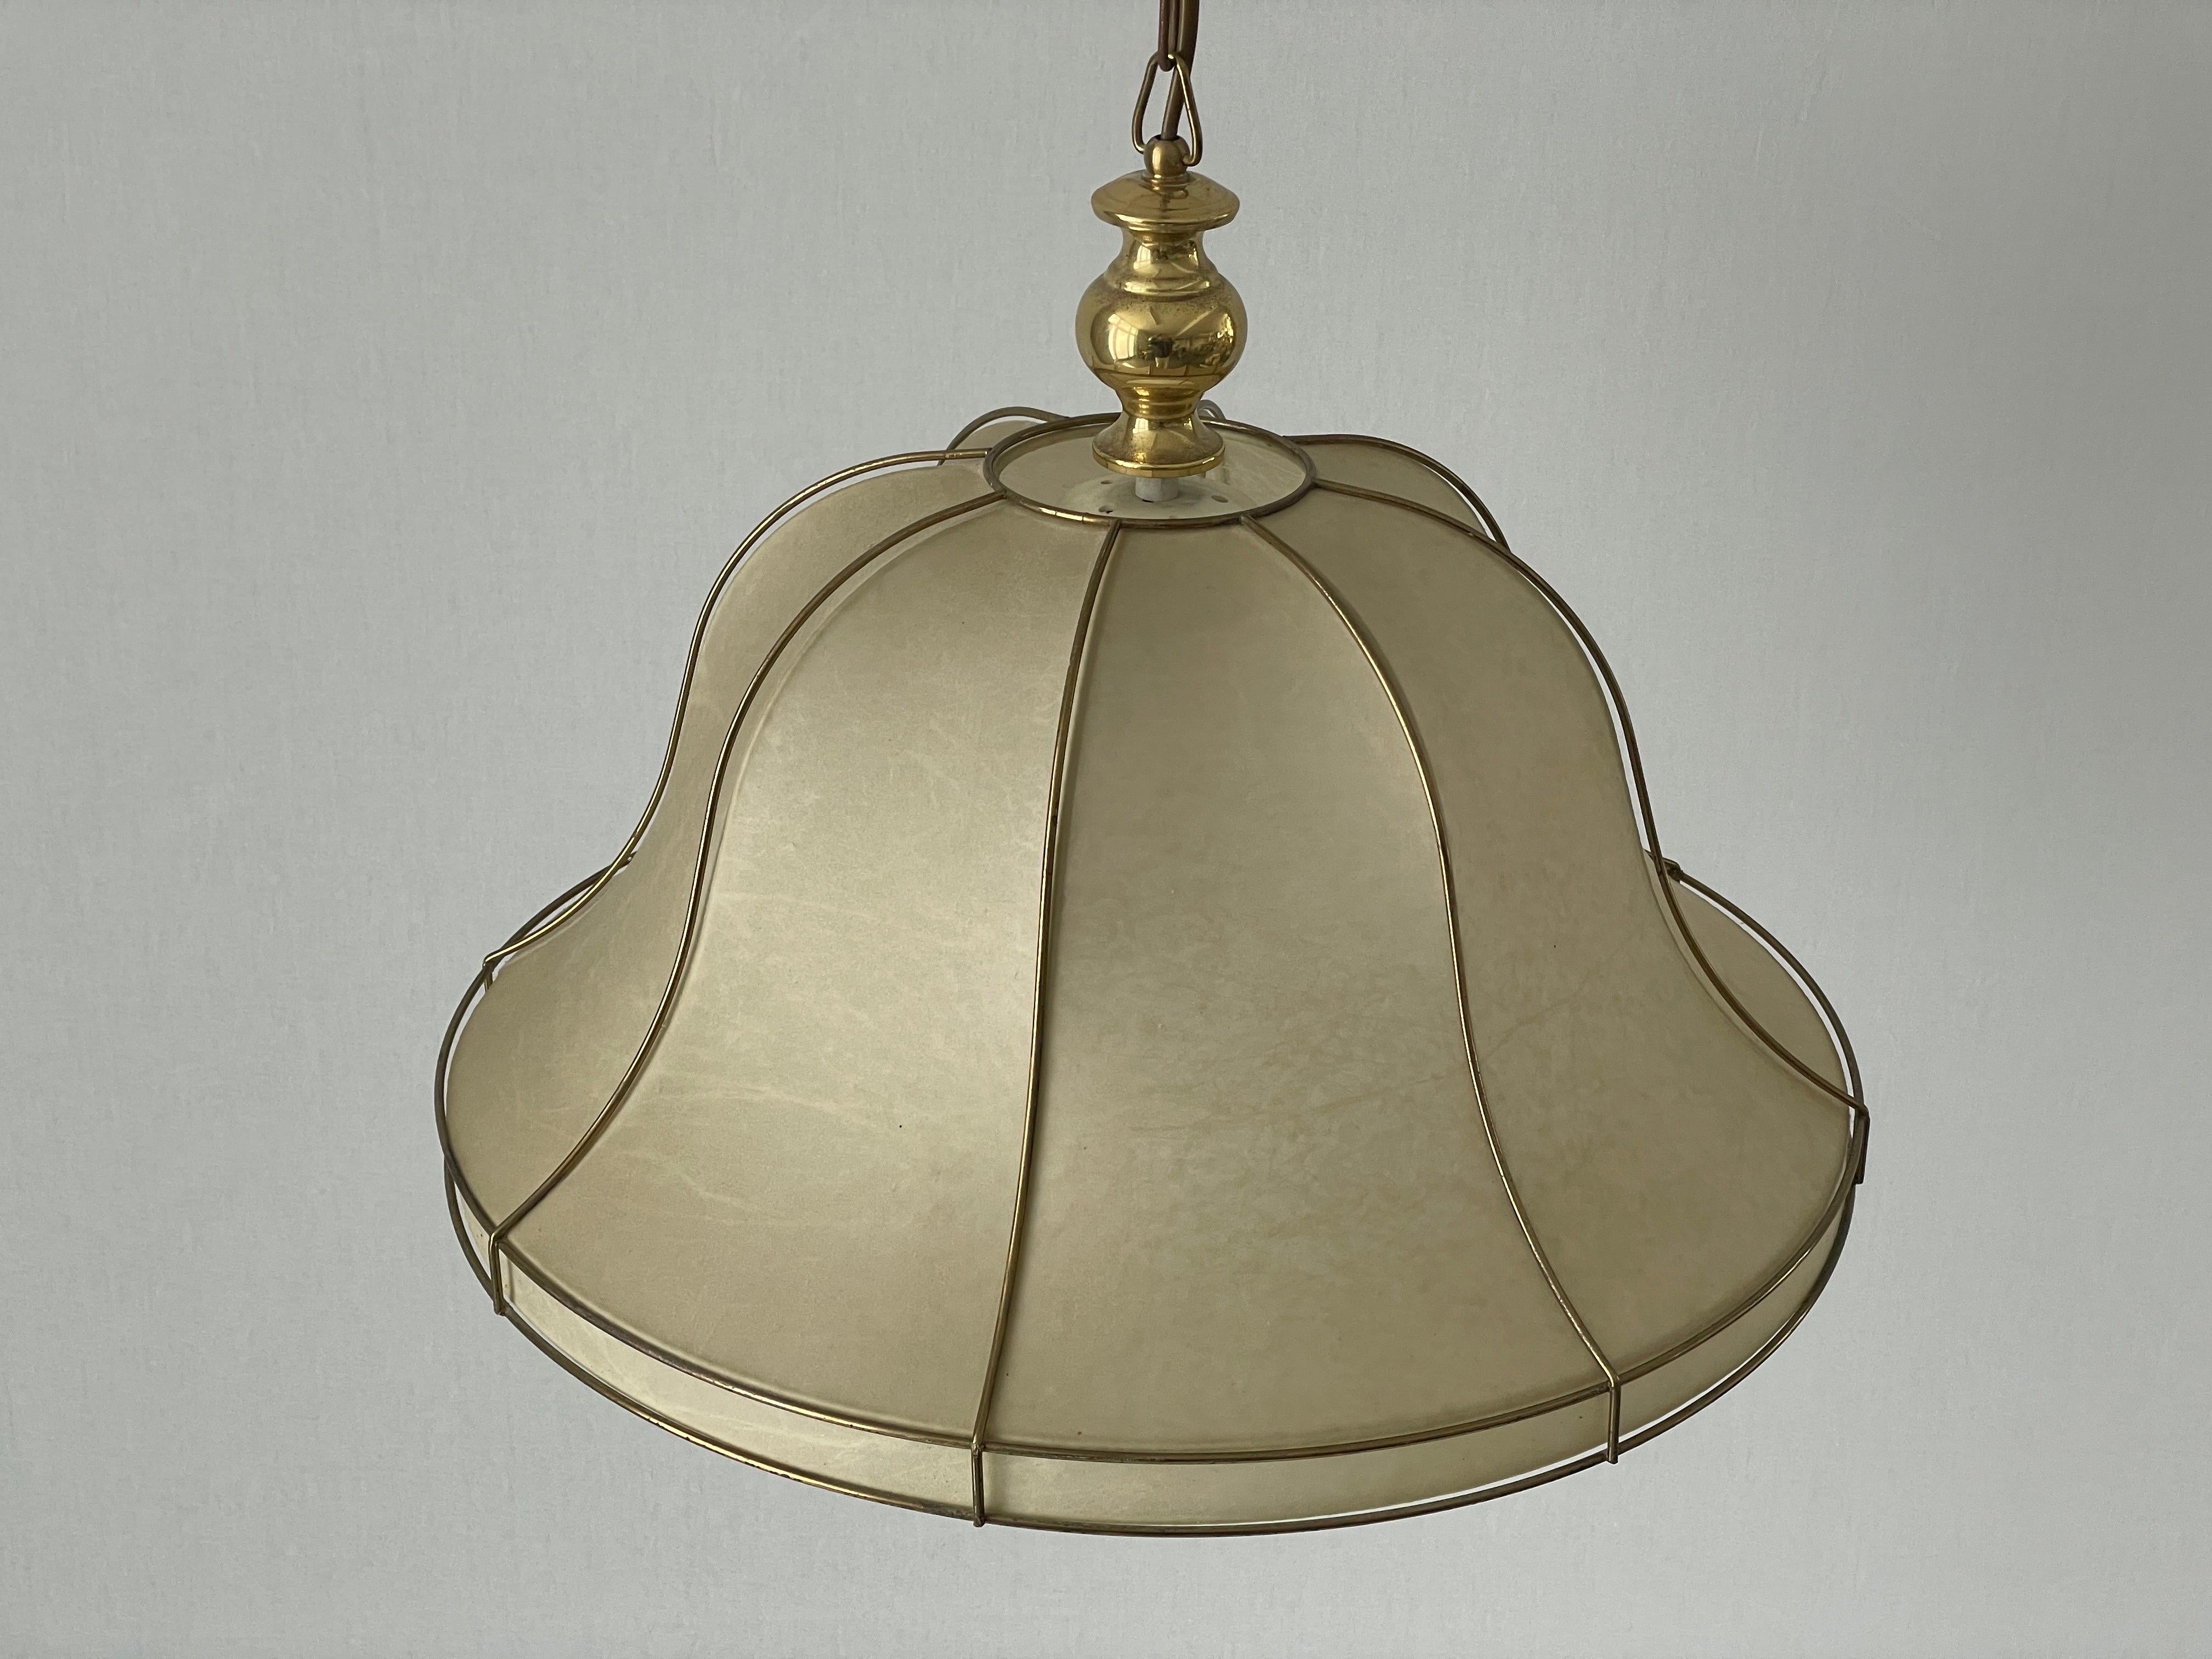 Cocoon Pendant Lamp with Gold Metal Shade Frame by Goldkant, 1960s, Germany

Lampshade is in very good vintage condition.

This lamp works with E27 light bulbs. 
Wired and suitable to use with 220V and 110V for all countries.

Measurements:
Height: